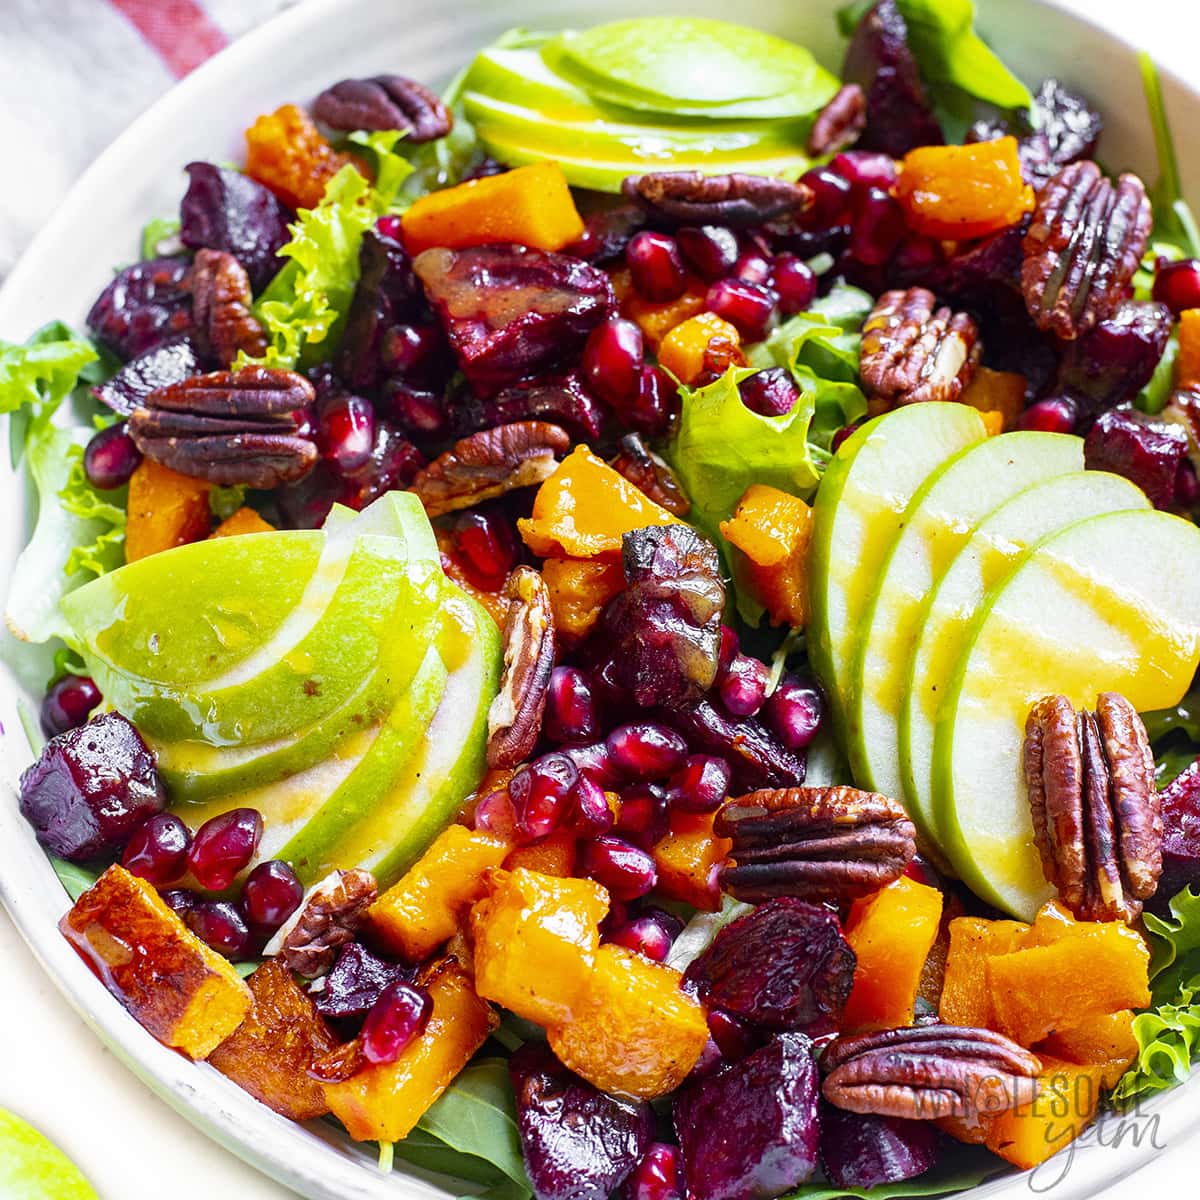 7 Winter Salads That Are Healthy and Delicious